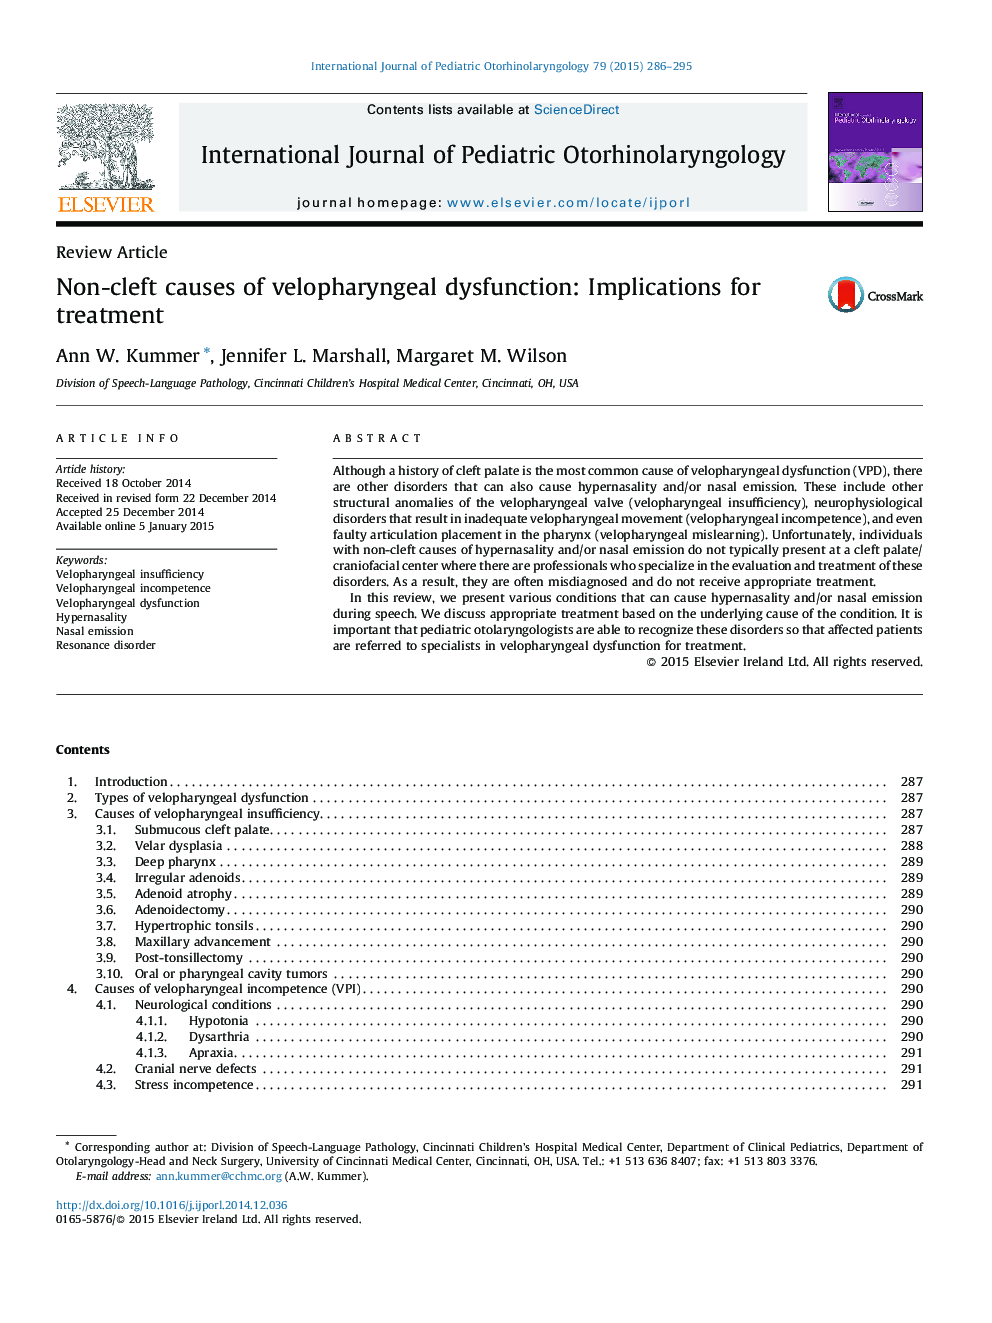 Non-cleft causes of velopharyngeal dysfunction: Implications for treatment